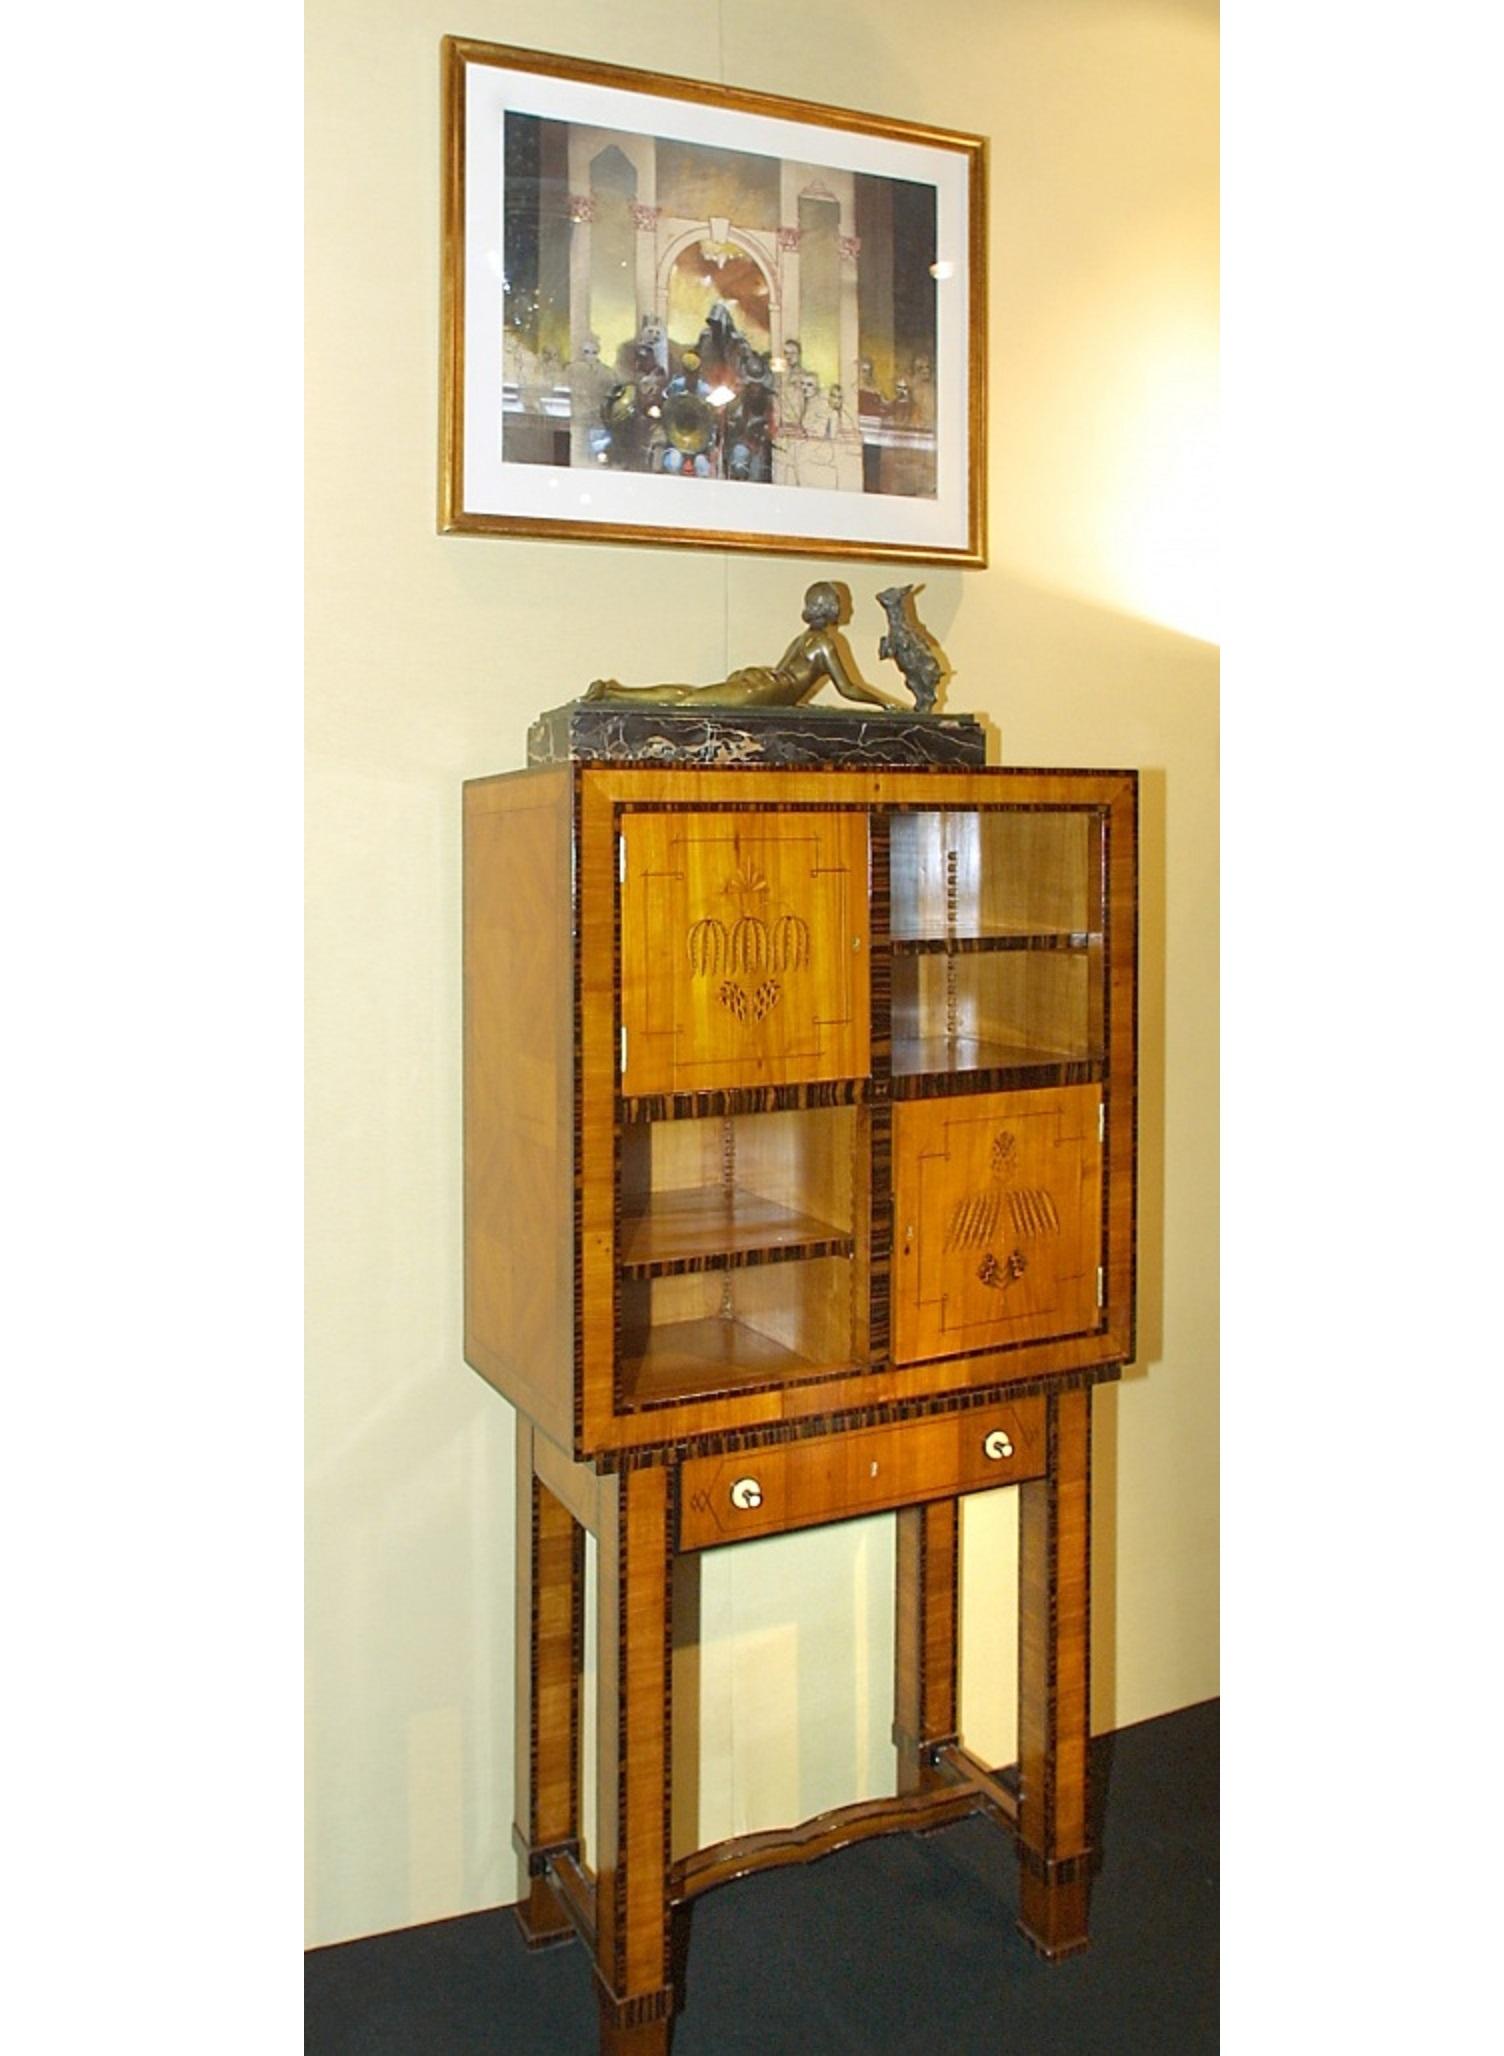 Austrian Furniture for Havana Cigars, Puros, Attributed to Koloman Moser and Werkstatte For Sale